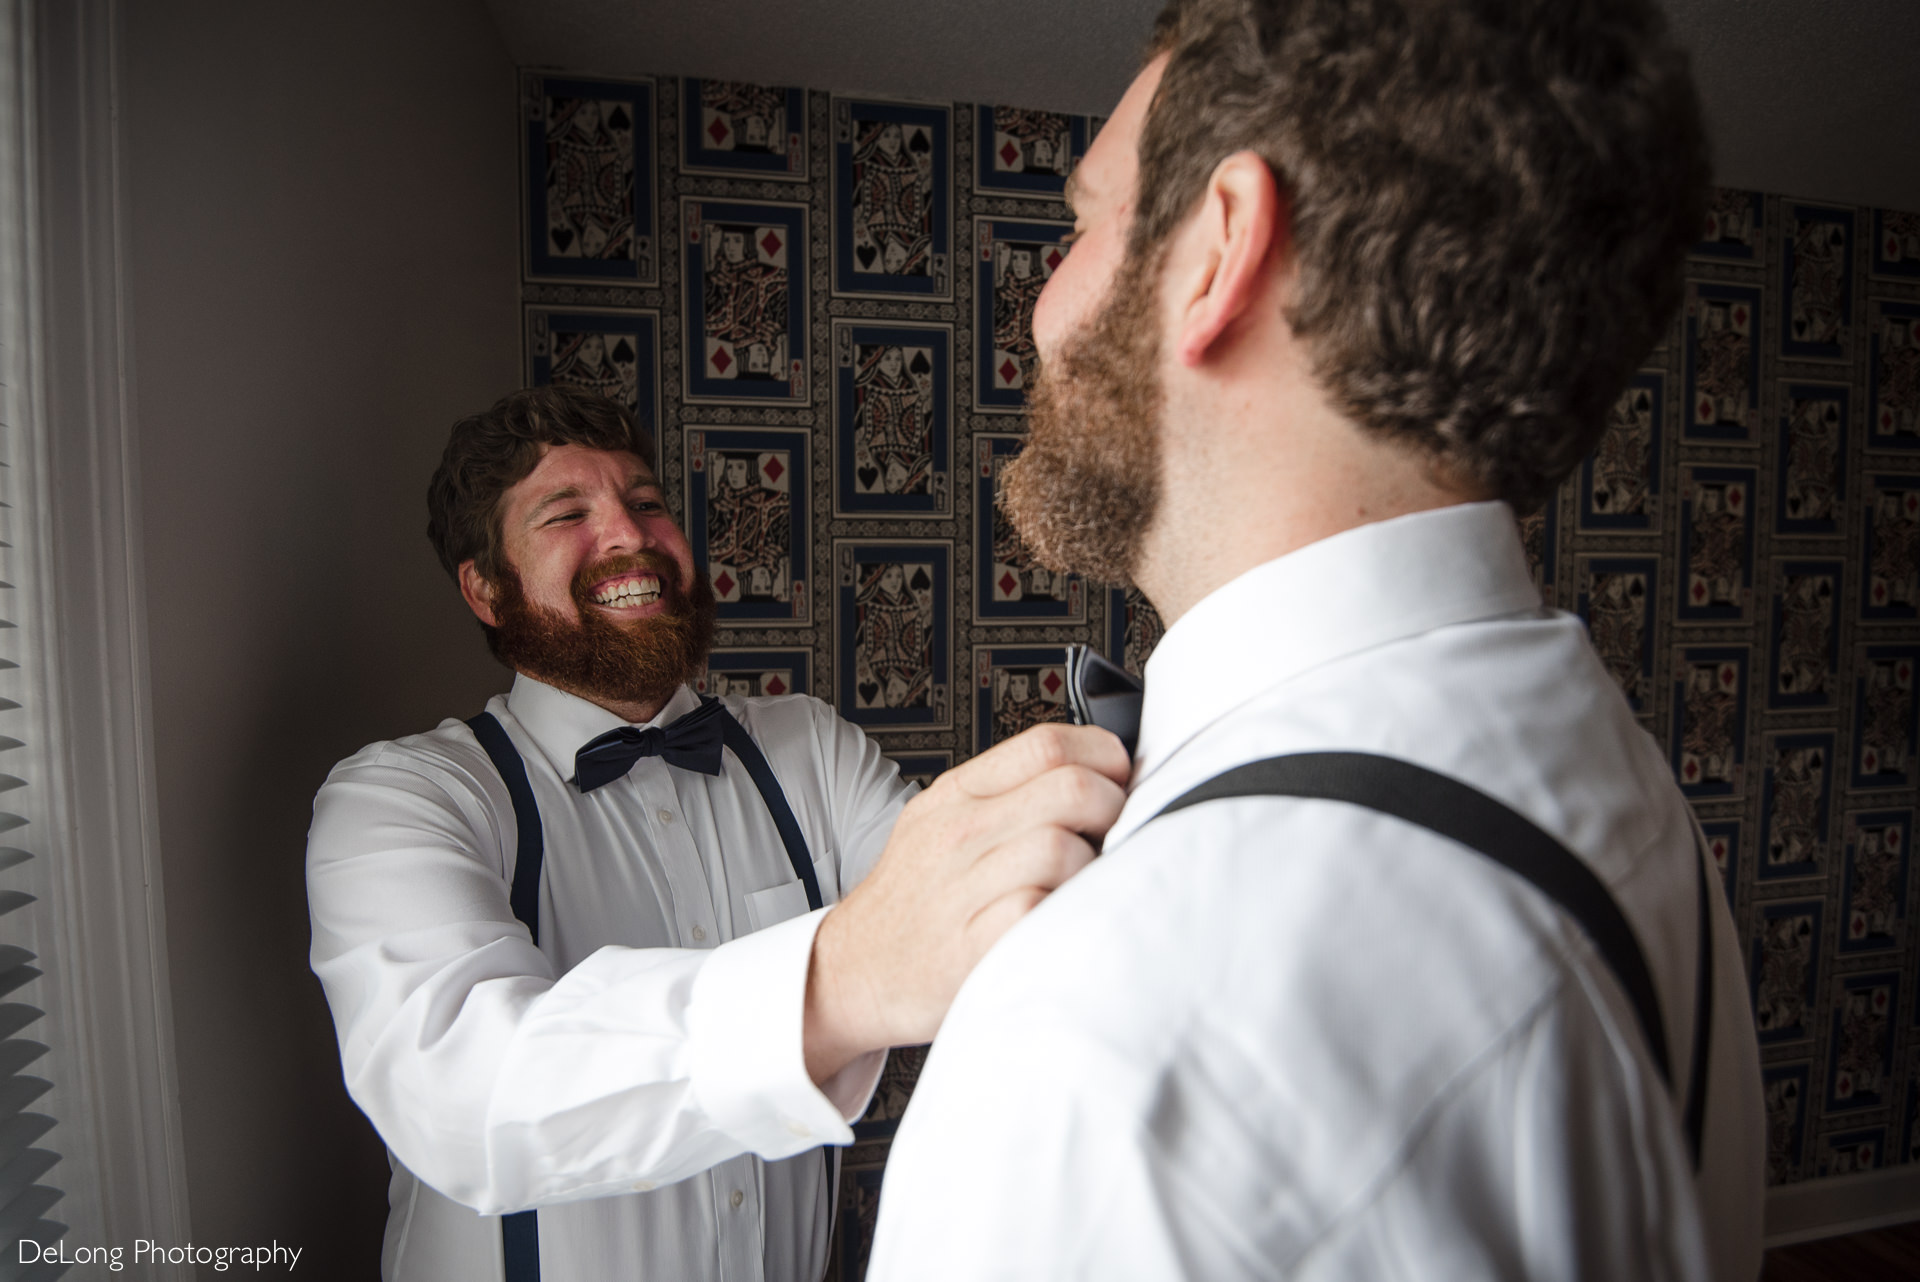 Brother helping put on tie of the groom at the Island house by Charlotte Wedding Photographers DeLong Photography